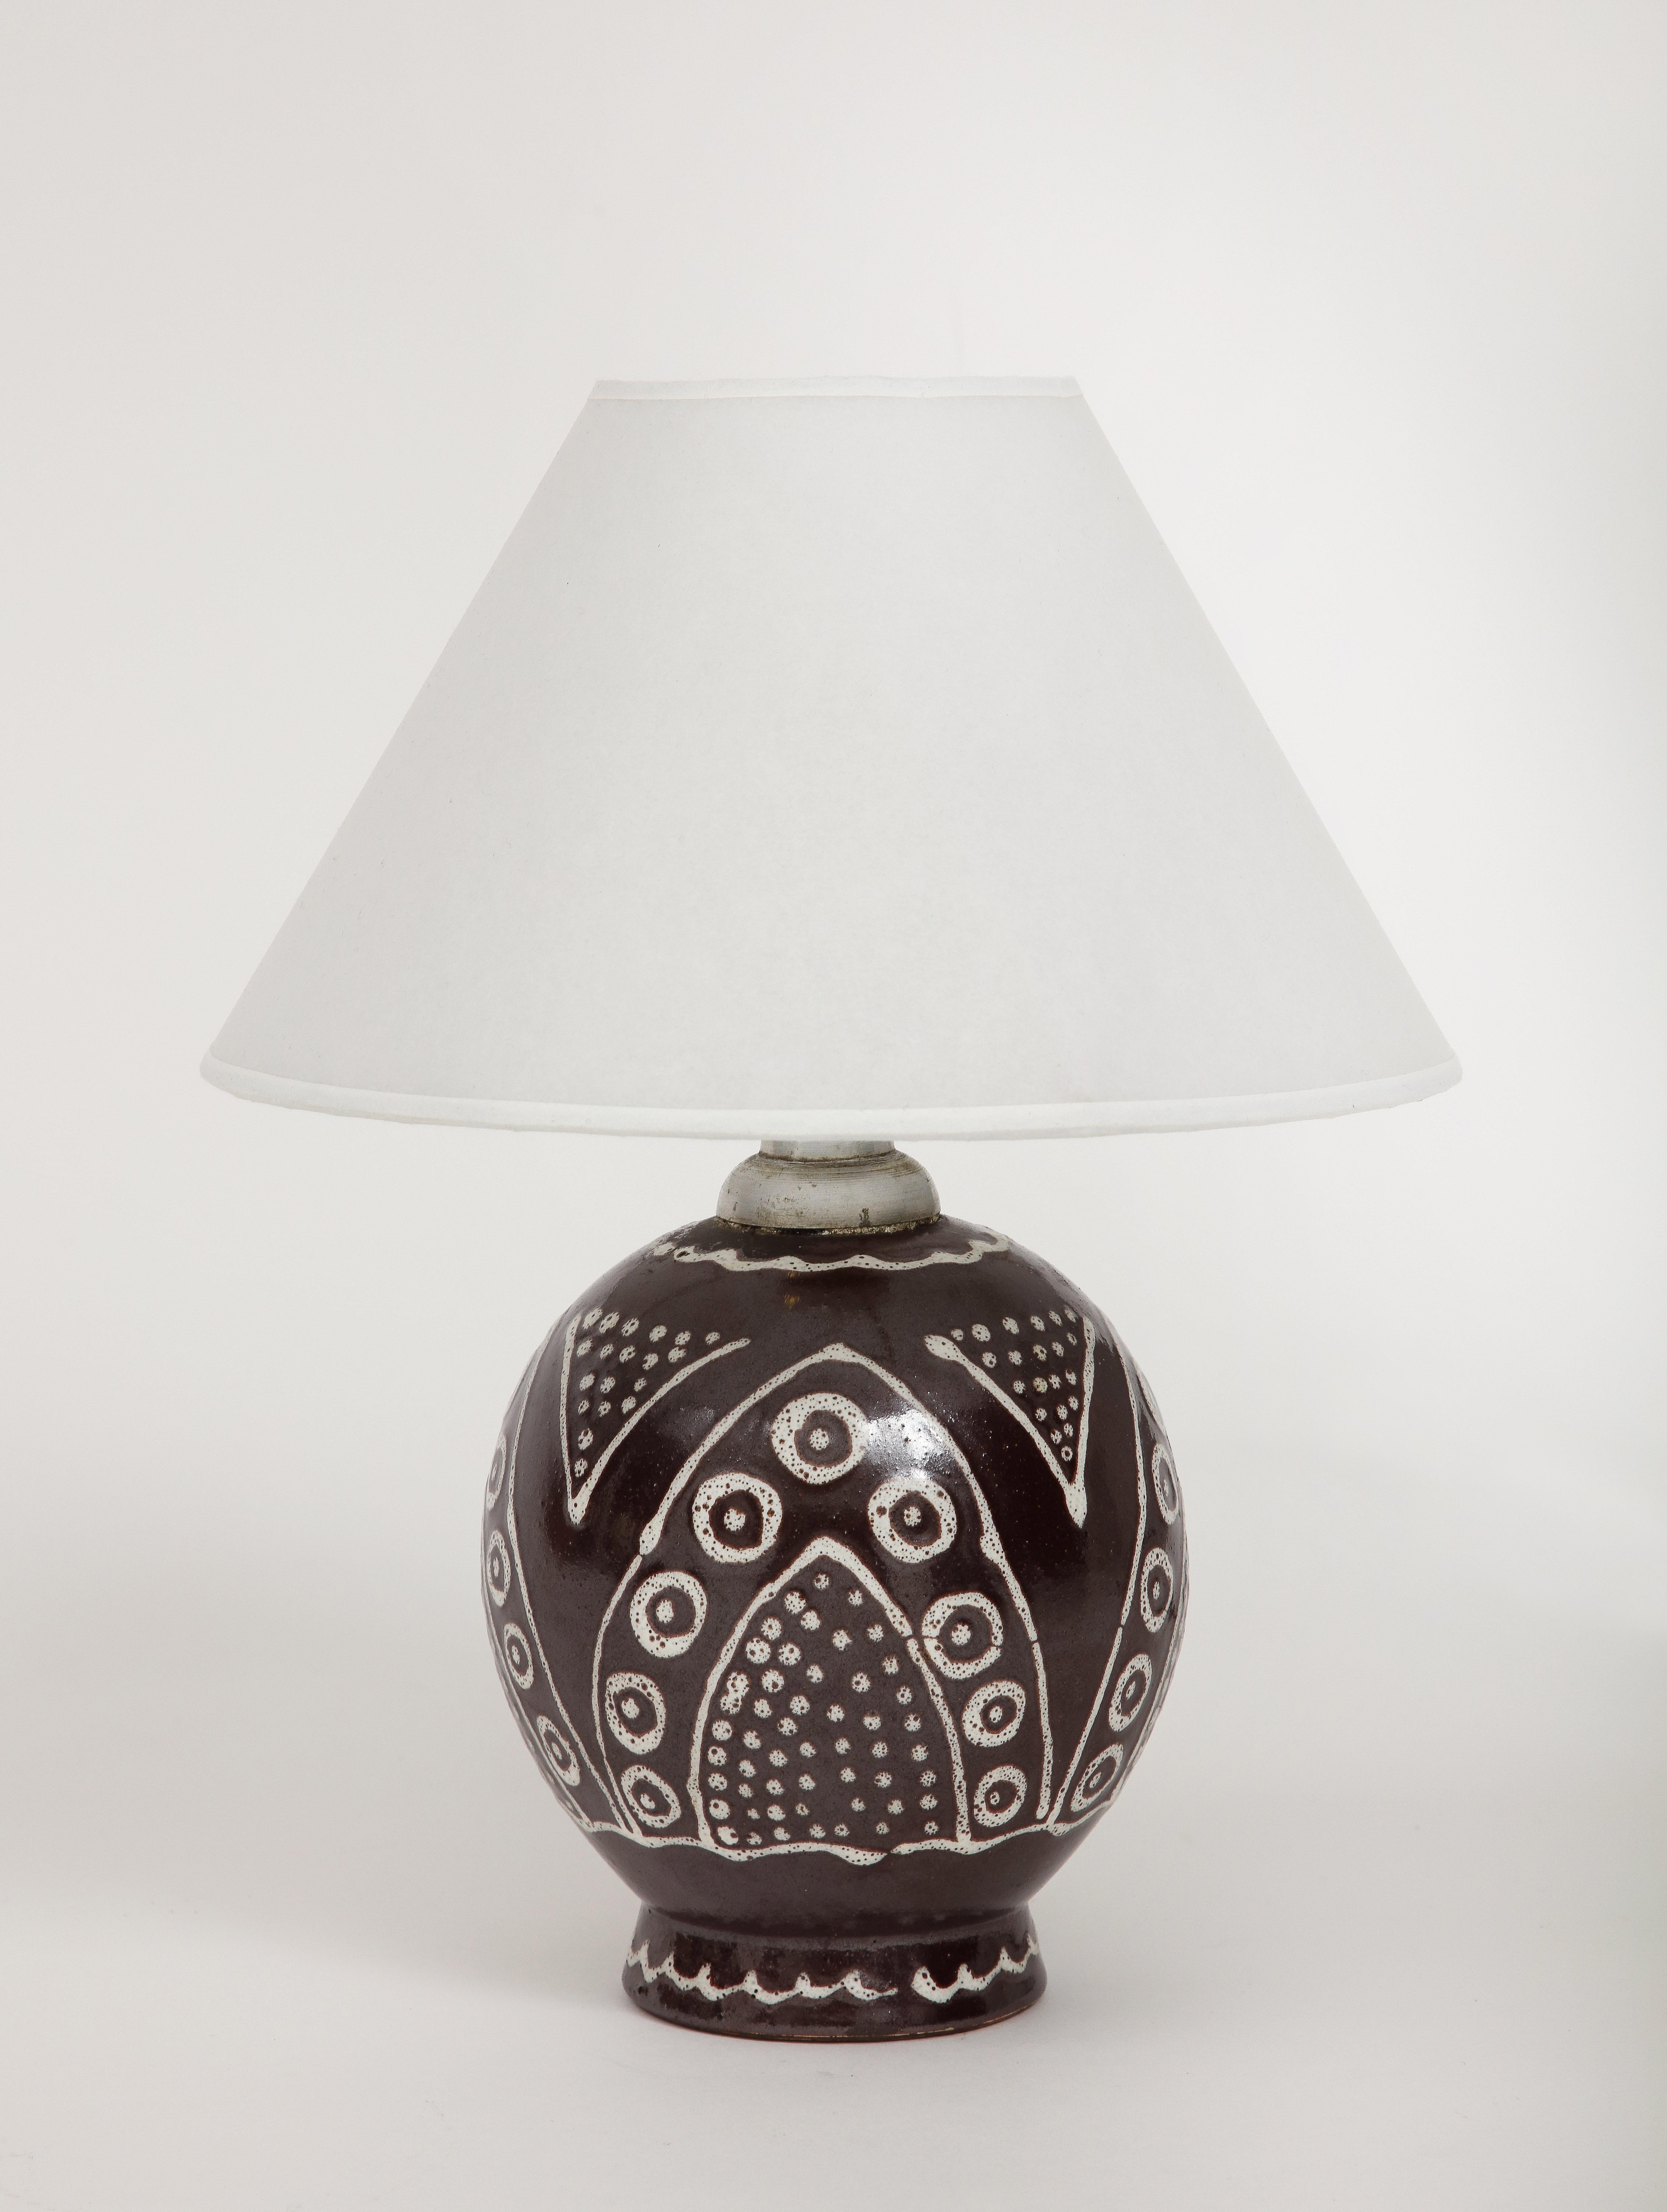 French Ceramic lamp with original hardware, scribe design, c. 1930, Numbered & inscribed in graphite
White Brown Glazed Ceramic

Custom Made Parchment Shade, Rewired, Silk Twist Cord with switch

Measures: Height: 10.75 Diameter. 5 in. Vessel